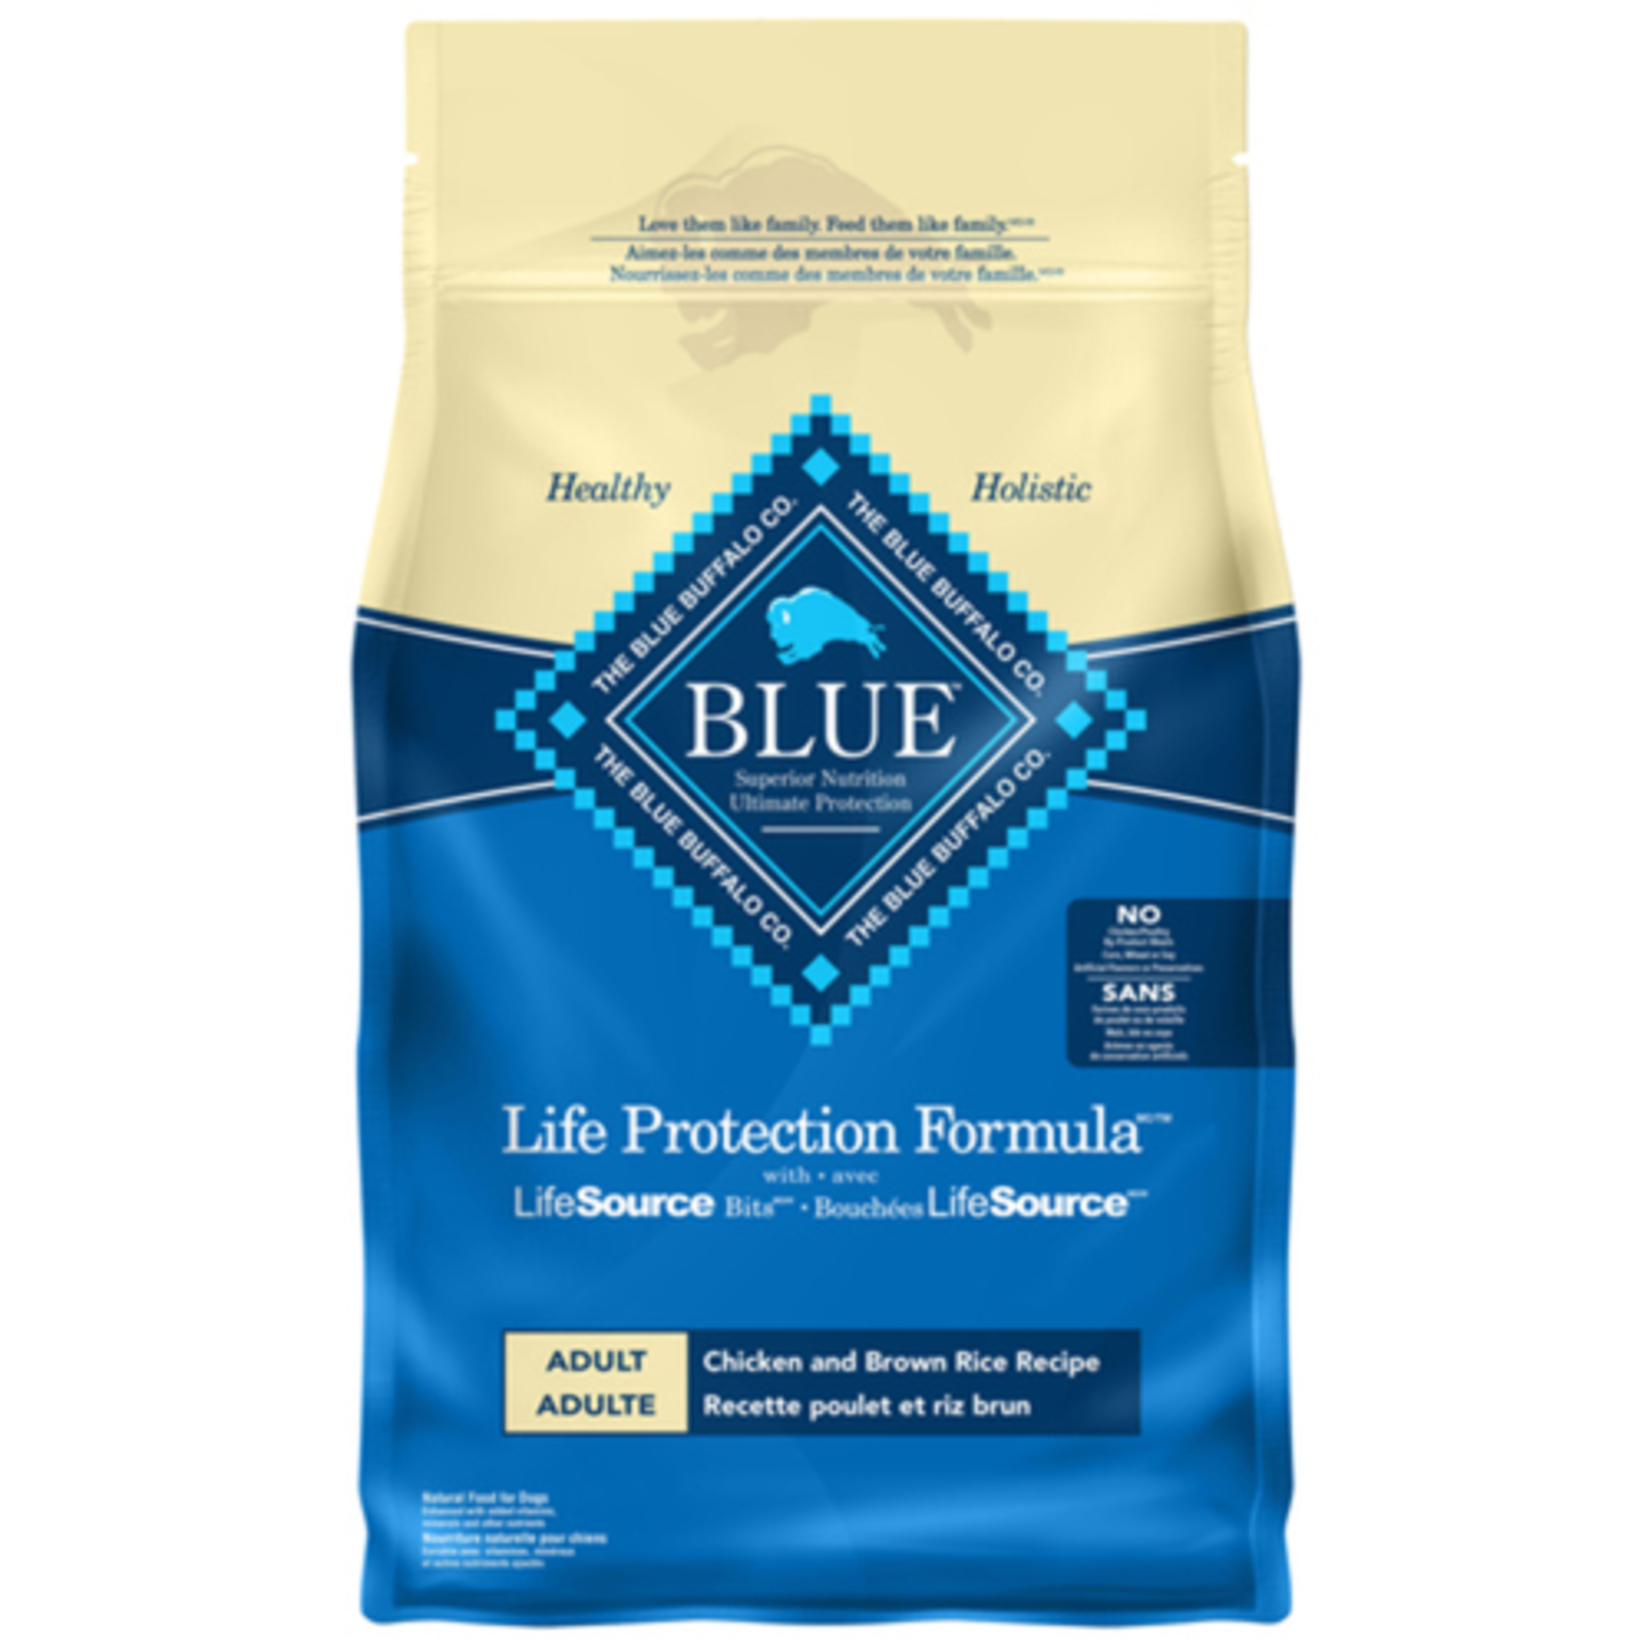 Blue Buffalo Dog Food - Chicken and Brown Rice Recipe 2.2kg